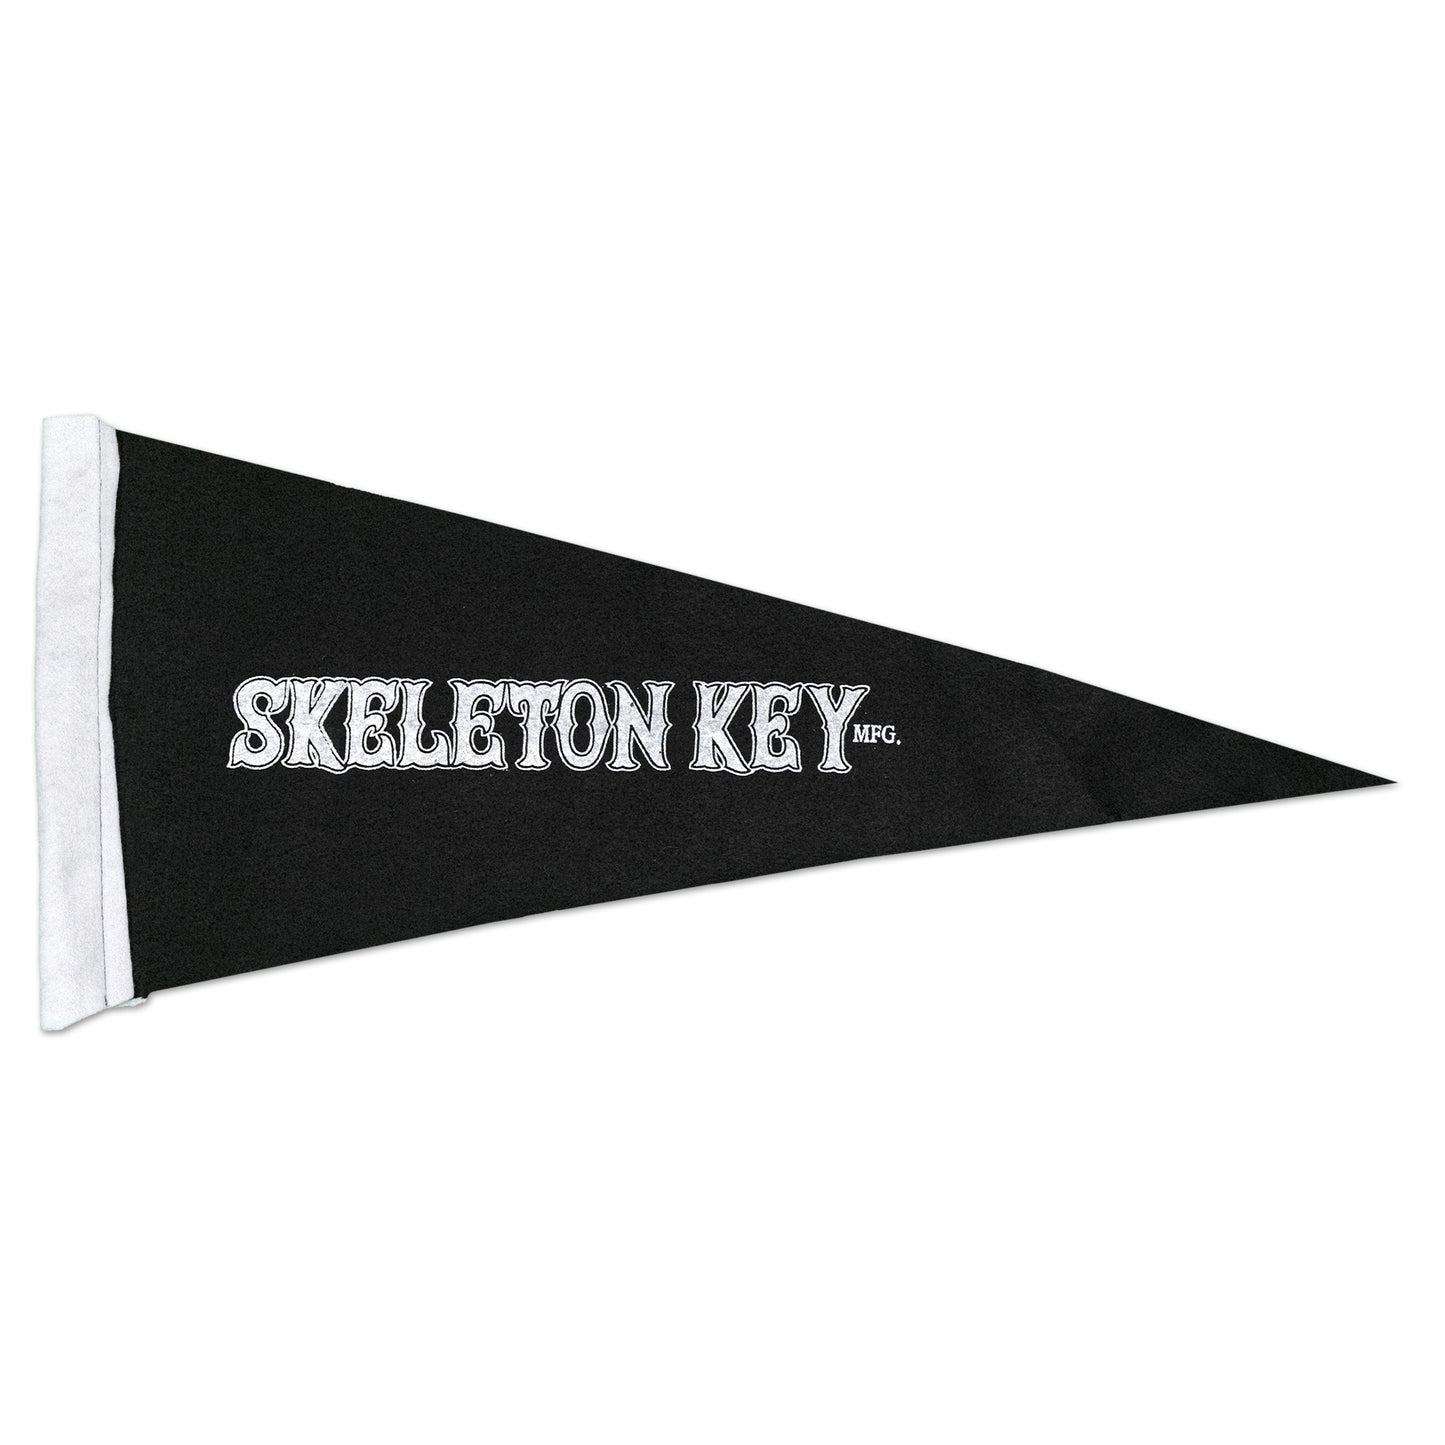 Hand made and printed Key Pennants